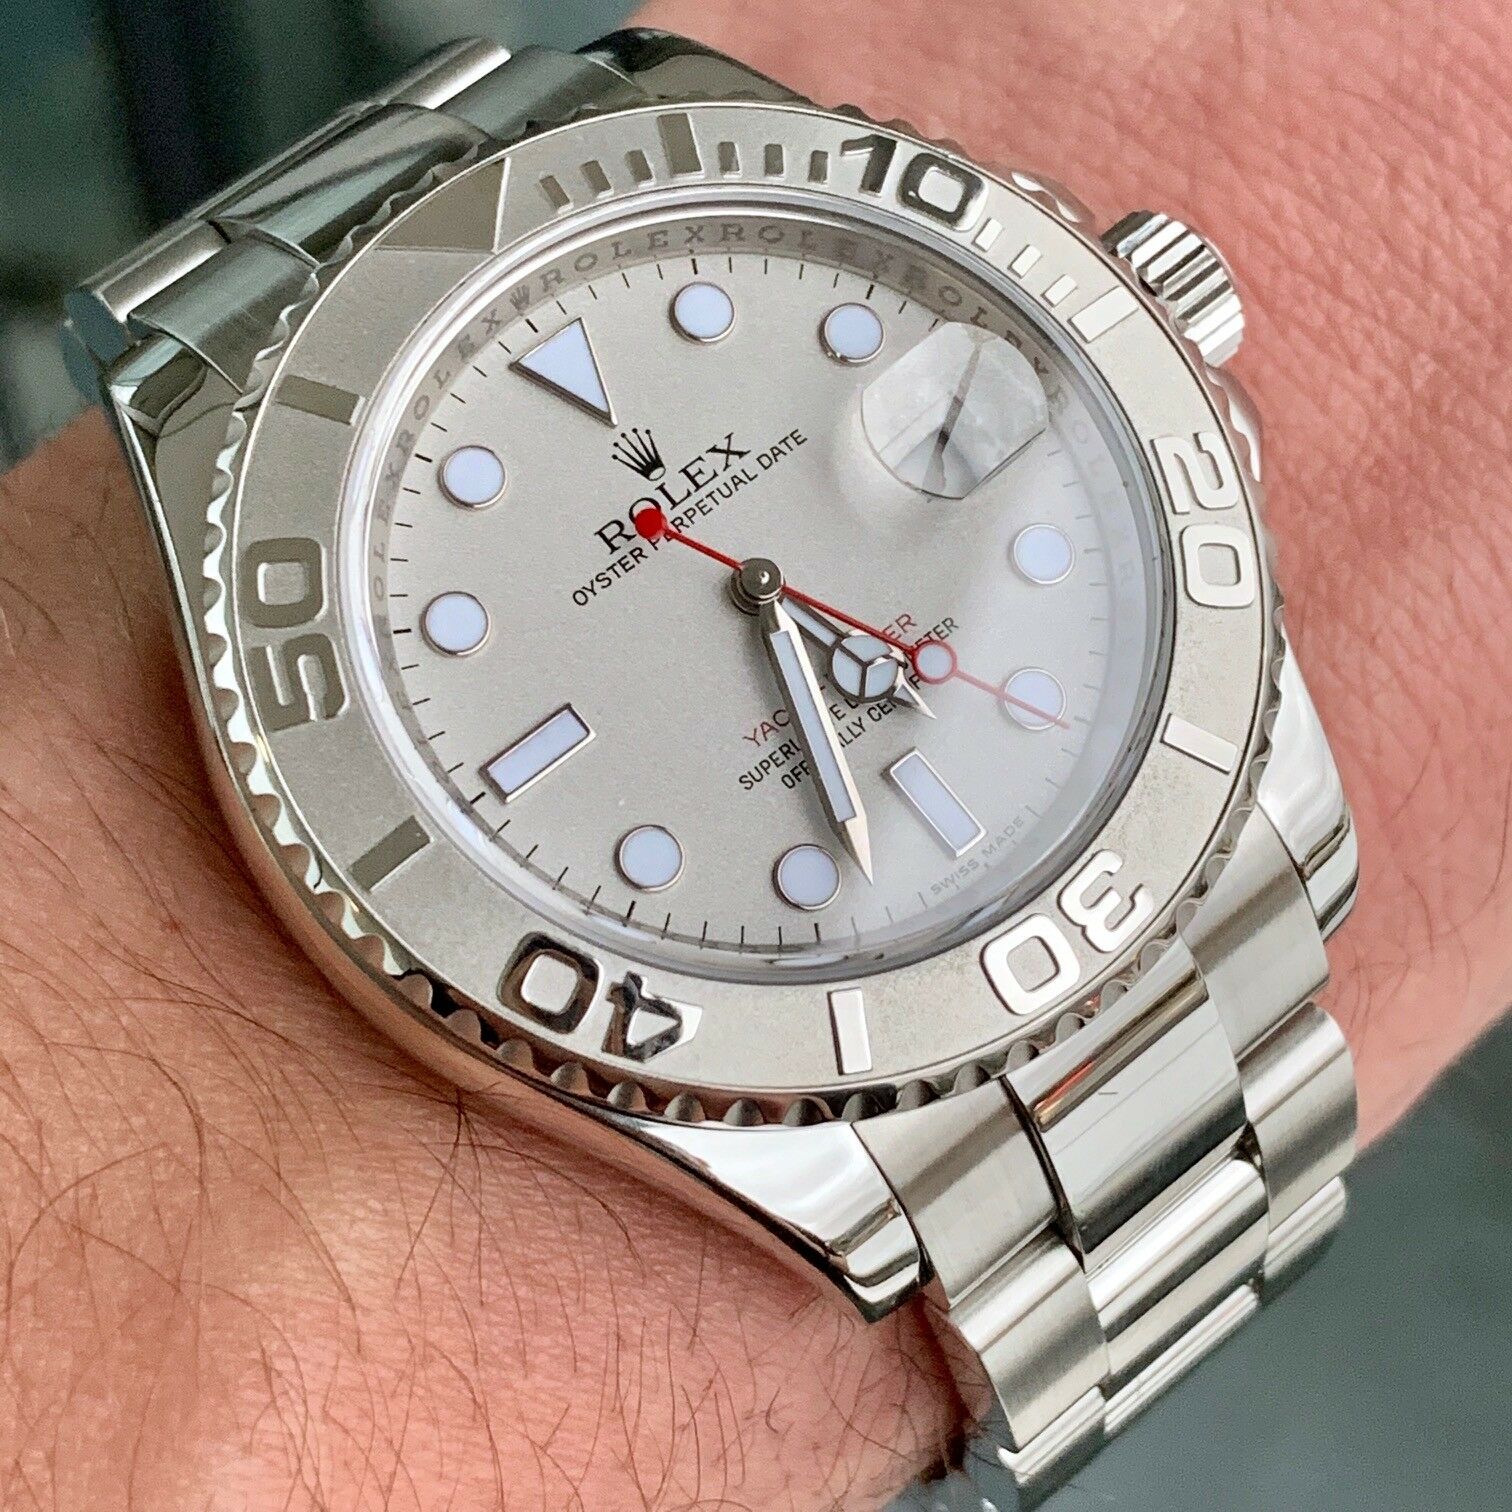 2006 Rolex Yacht-Master Ref. 16622 Platinum with Box & Papers